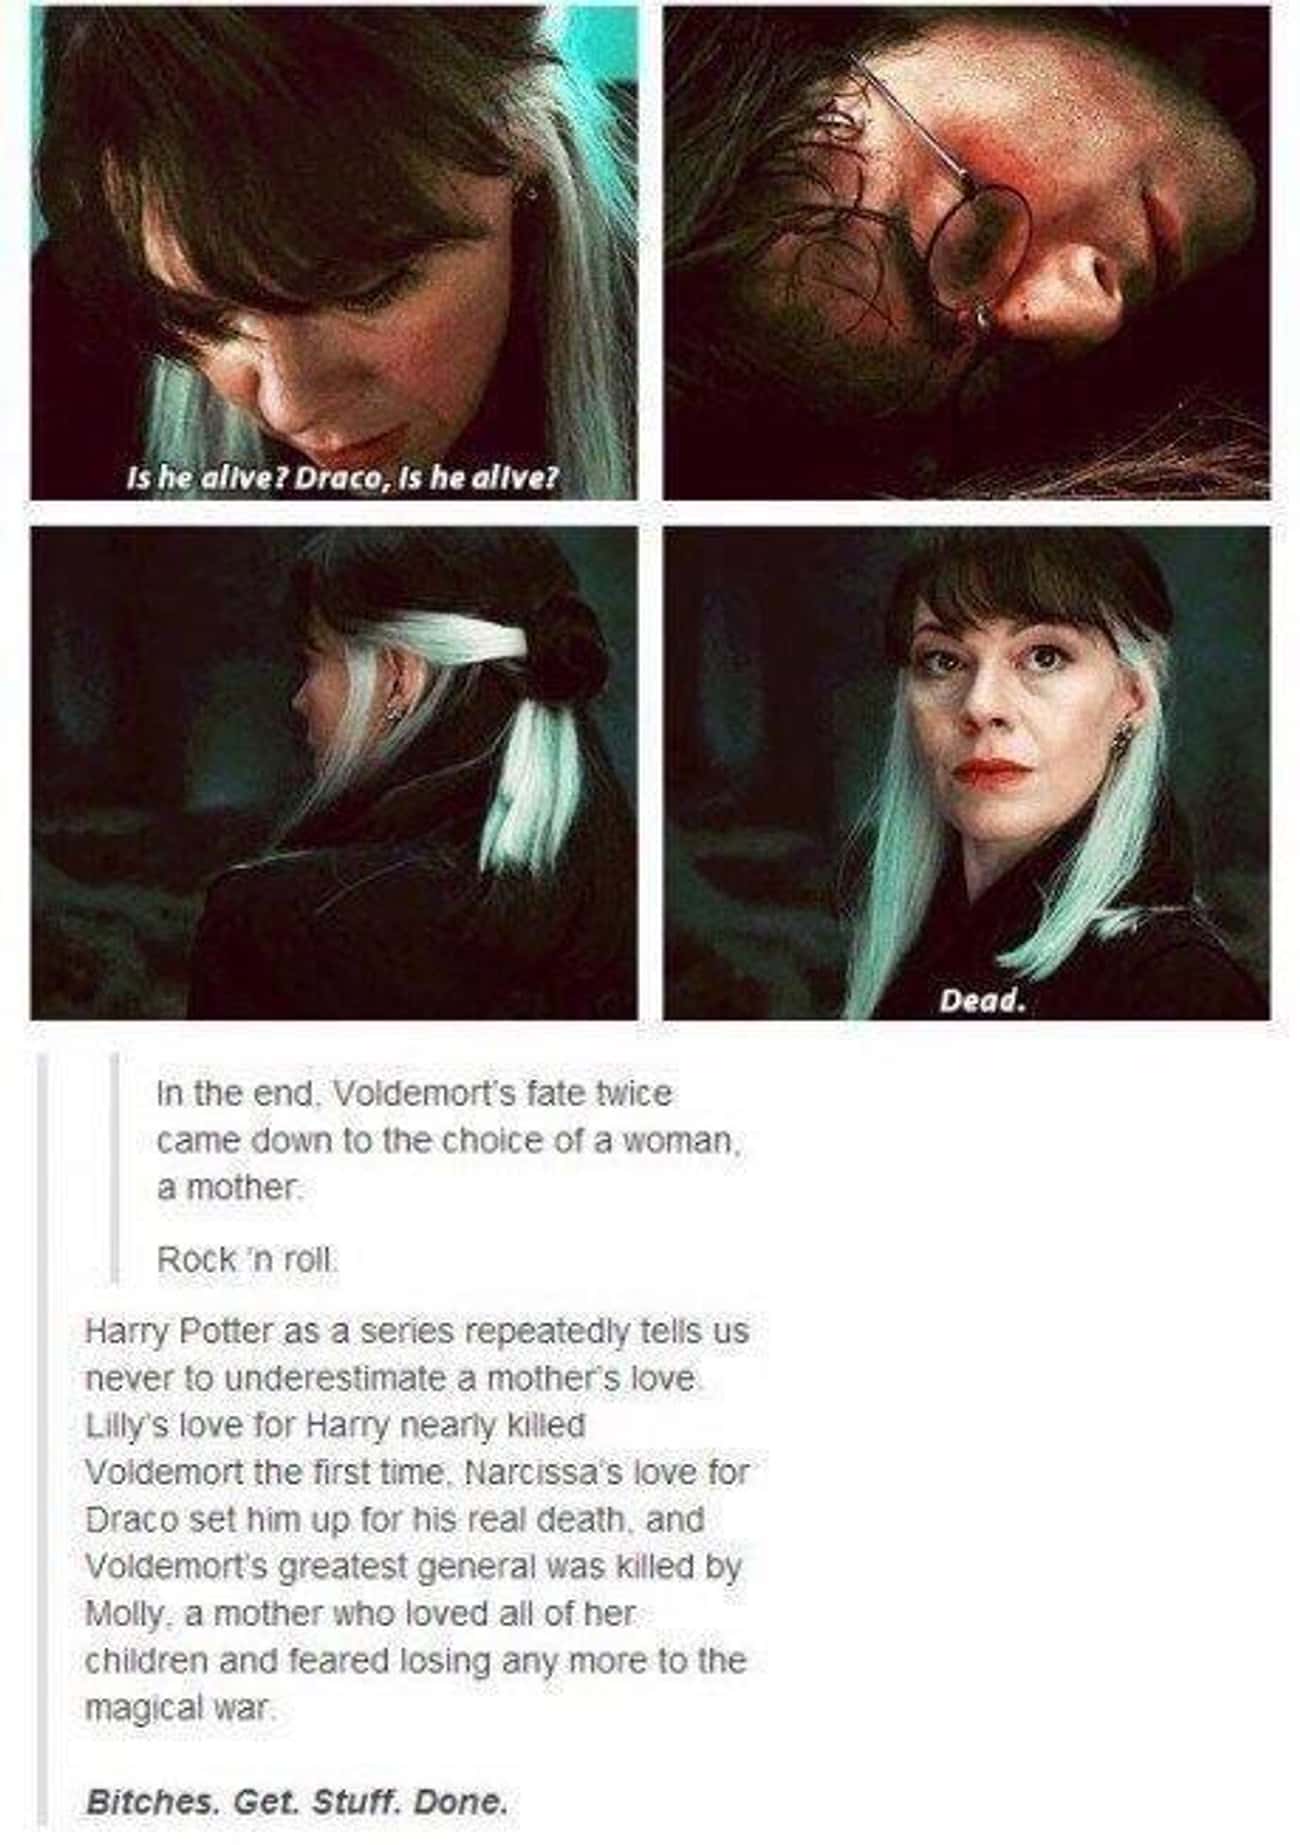 Voldemort Was Really Defeated By The Choices Of Two Mothers